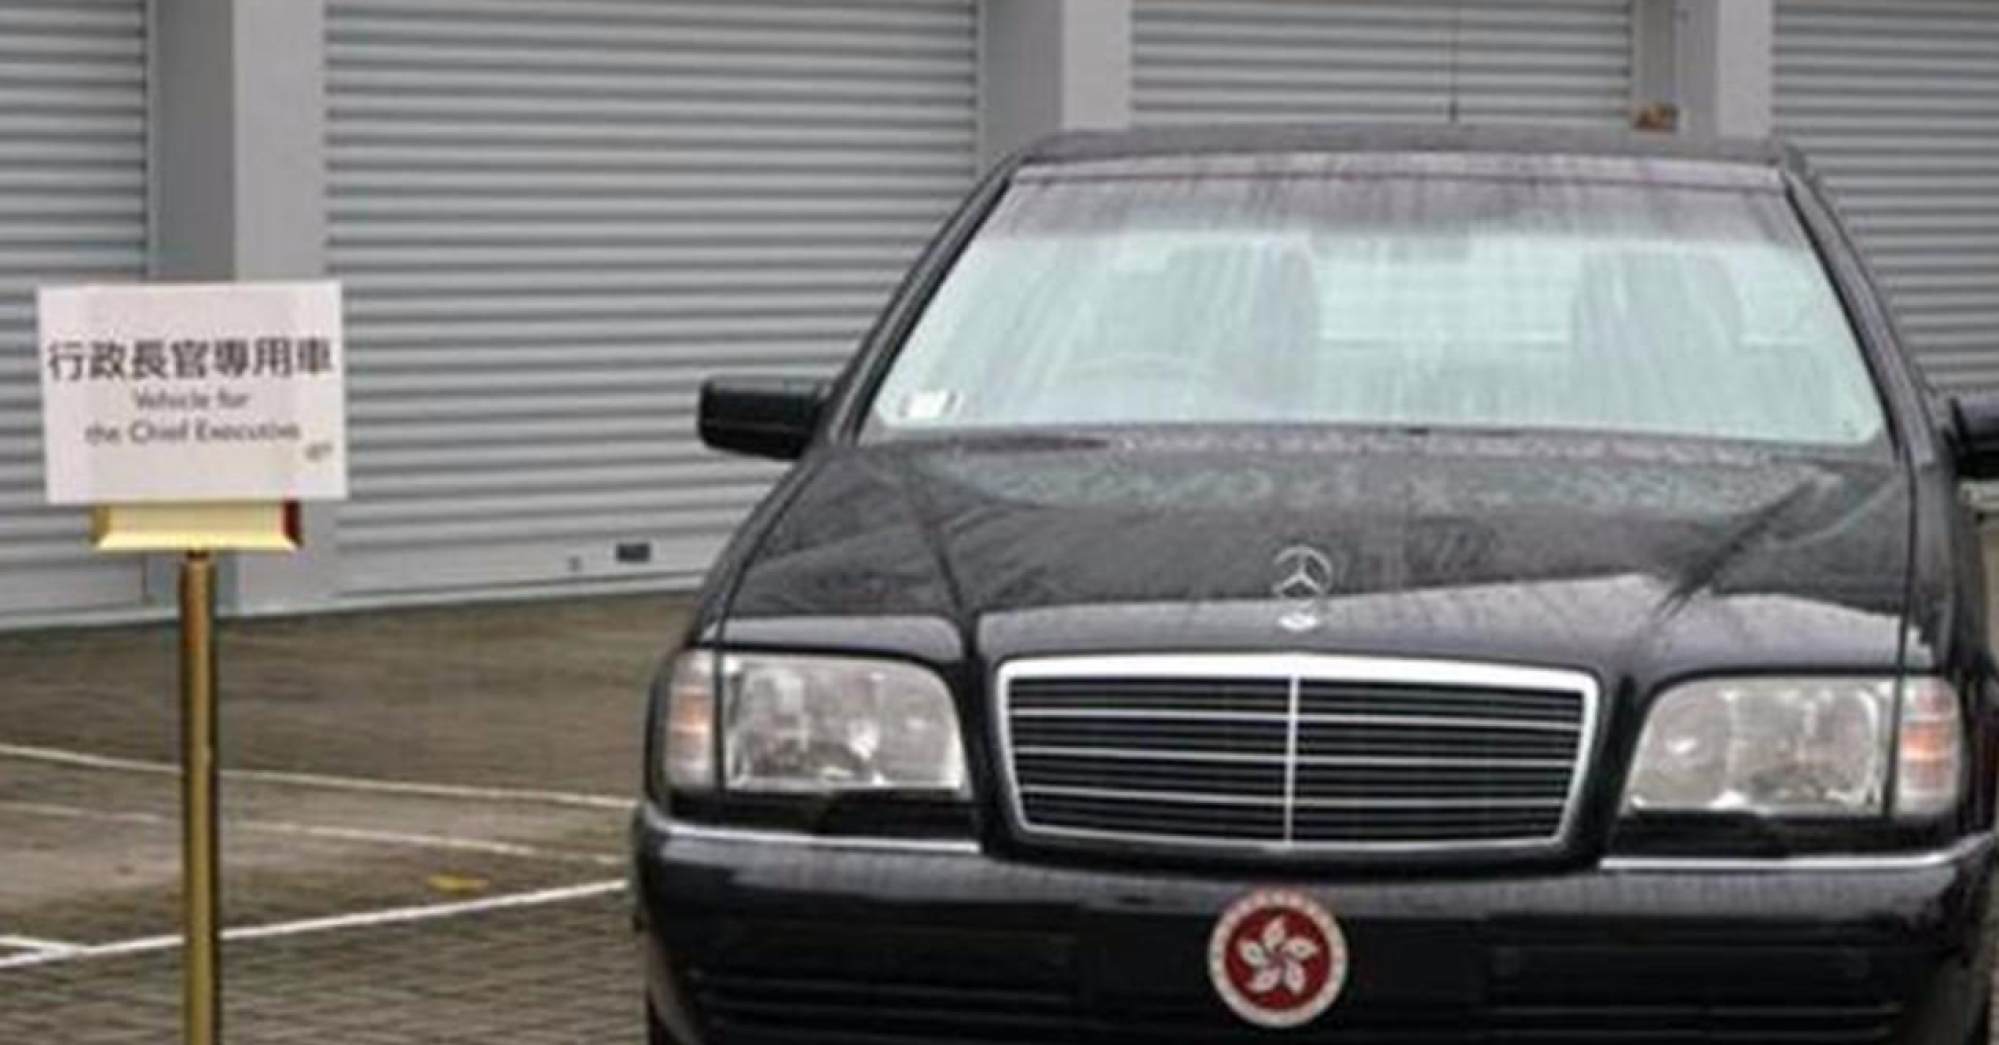 Carrie Lam’s Mercedes doesn’t have any number plates – just the Hong Kong emblem. Photo: auto.ifeng.com